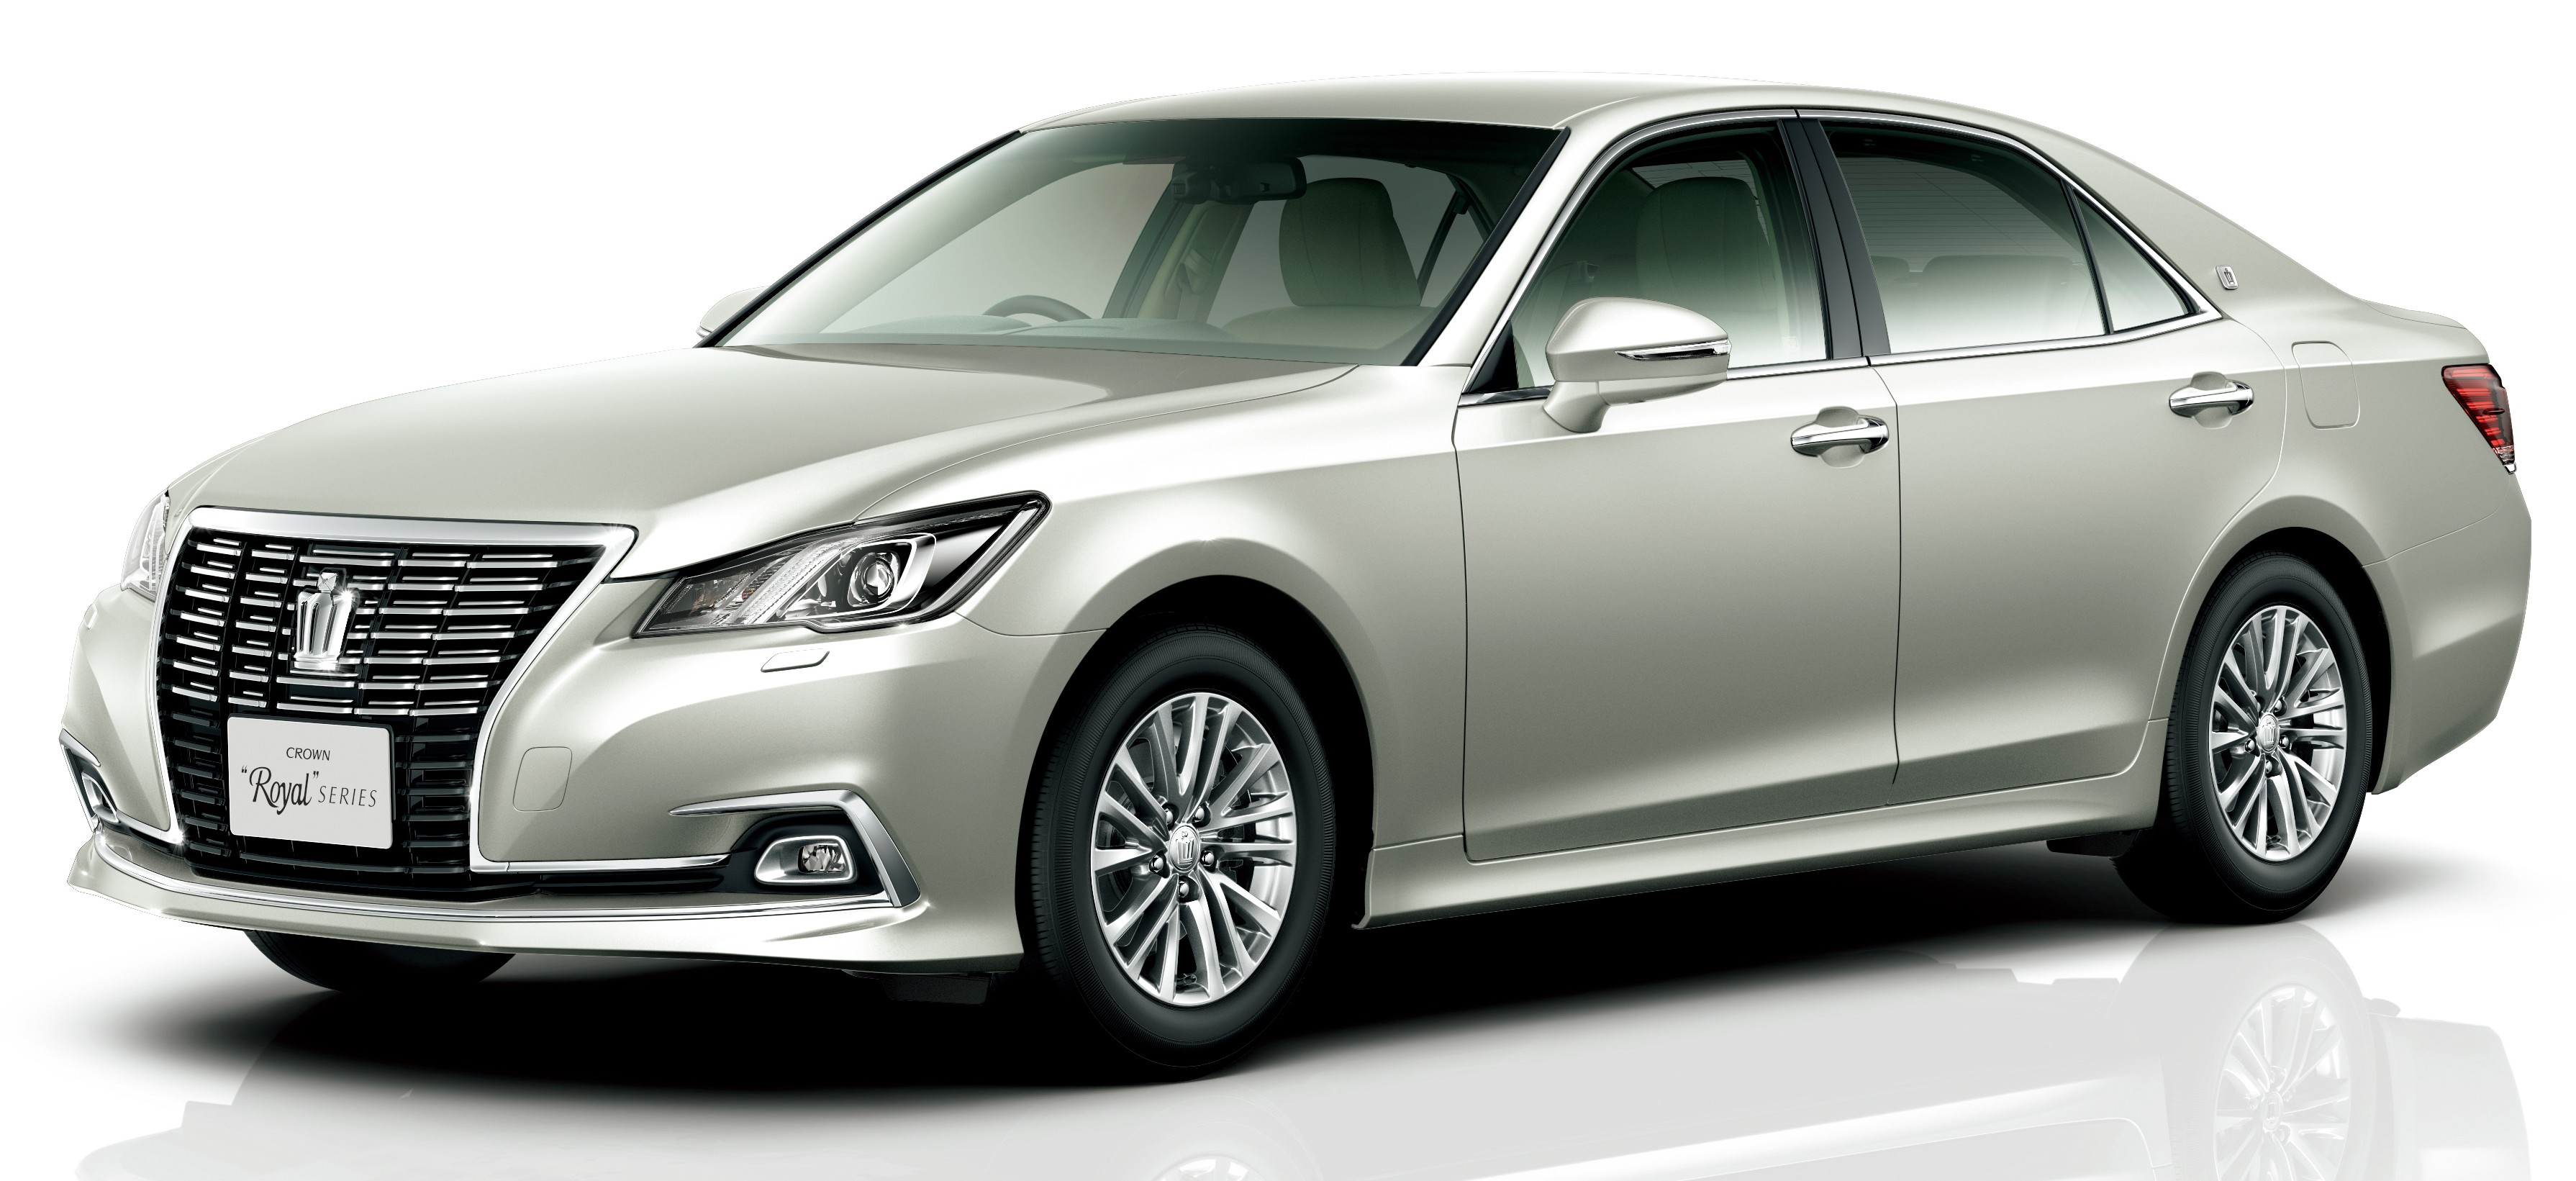 Toyota Crown facelift gets new 2.0 litre turbo engine toyota-crown ...